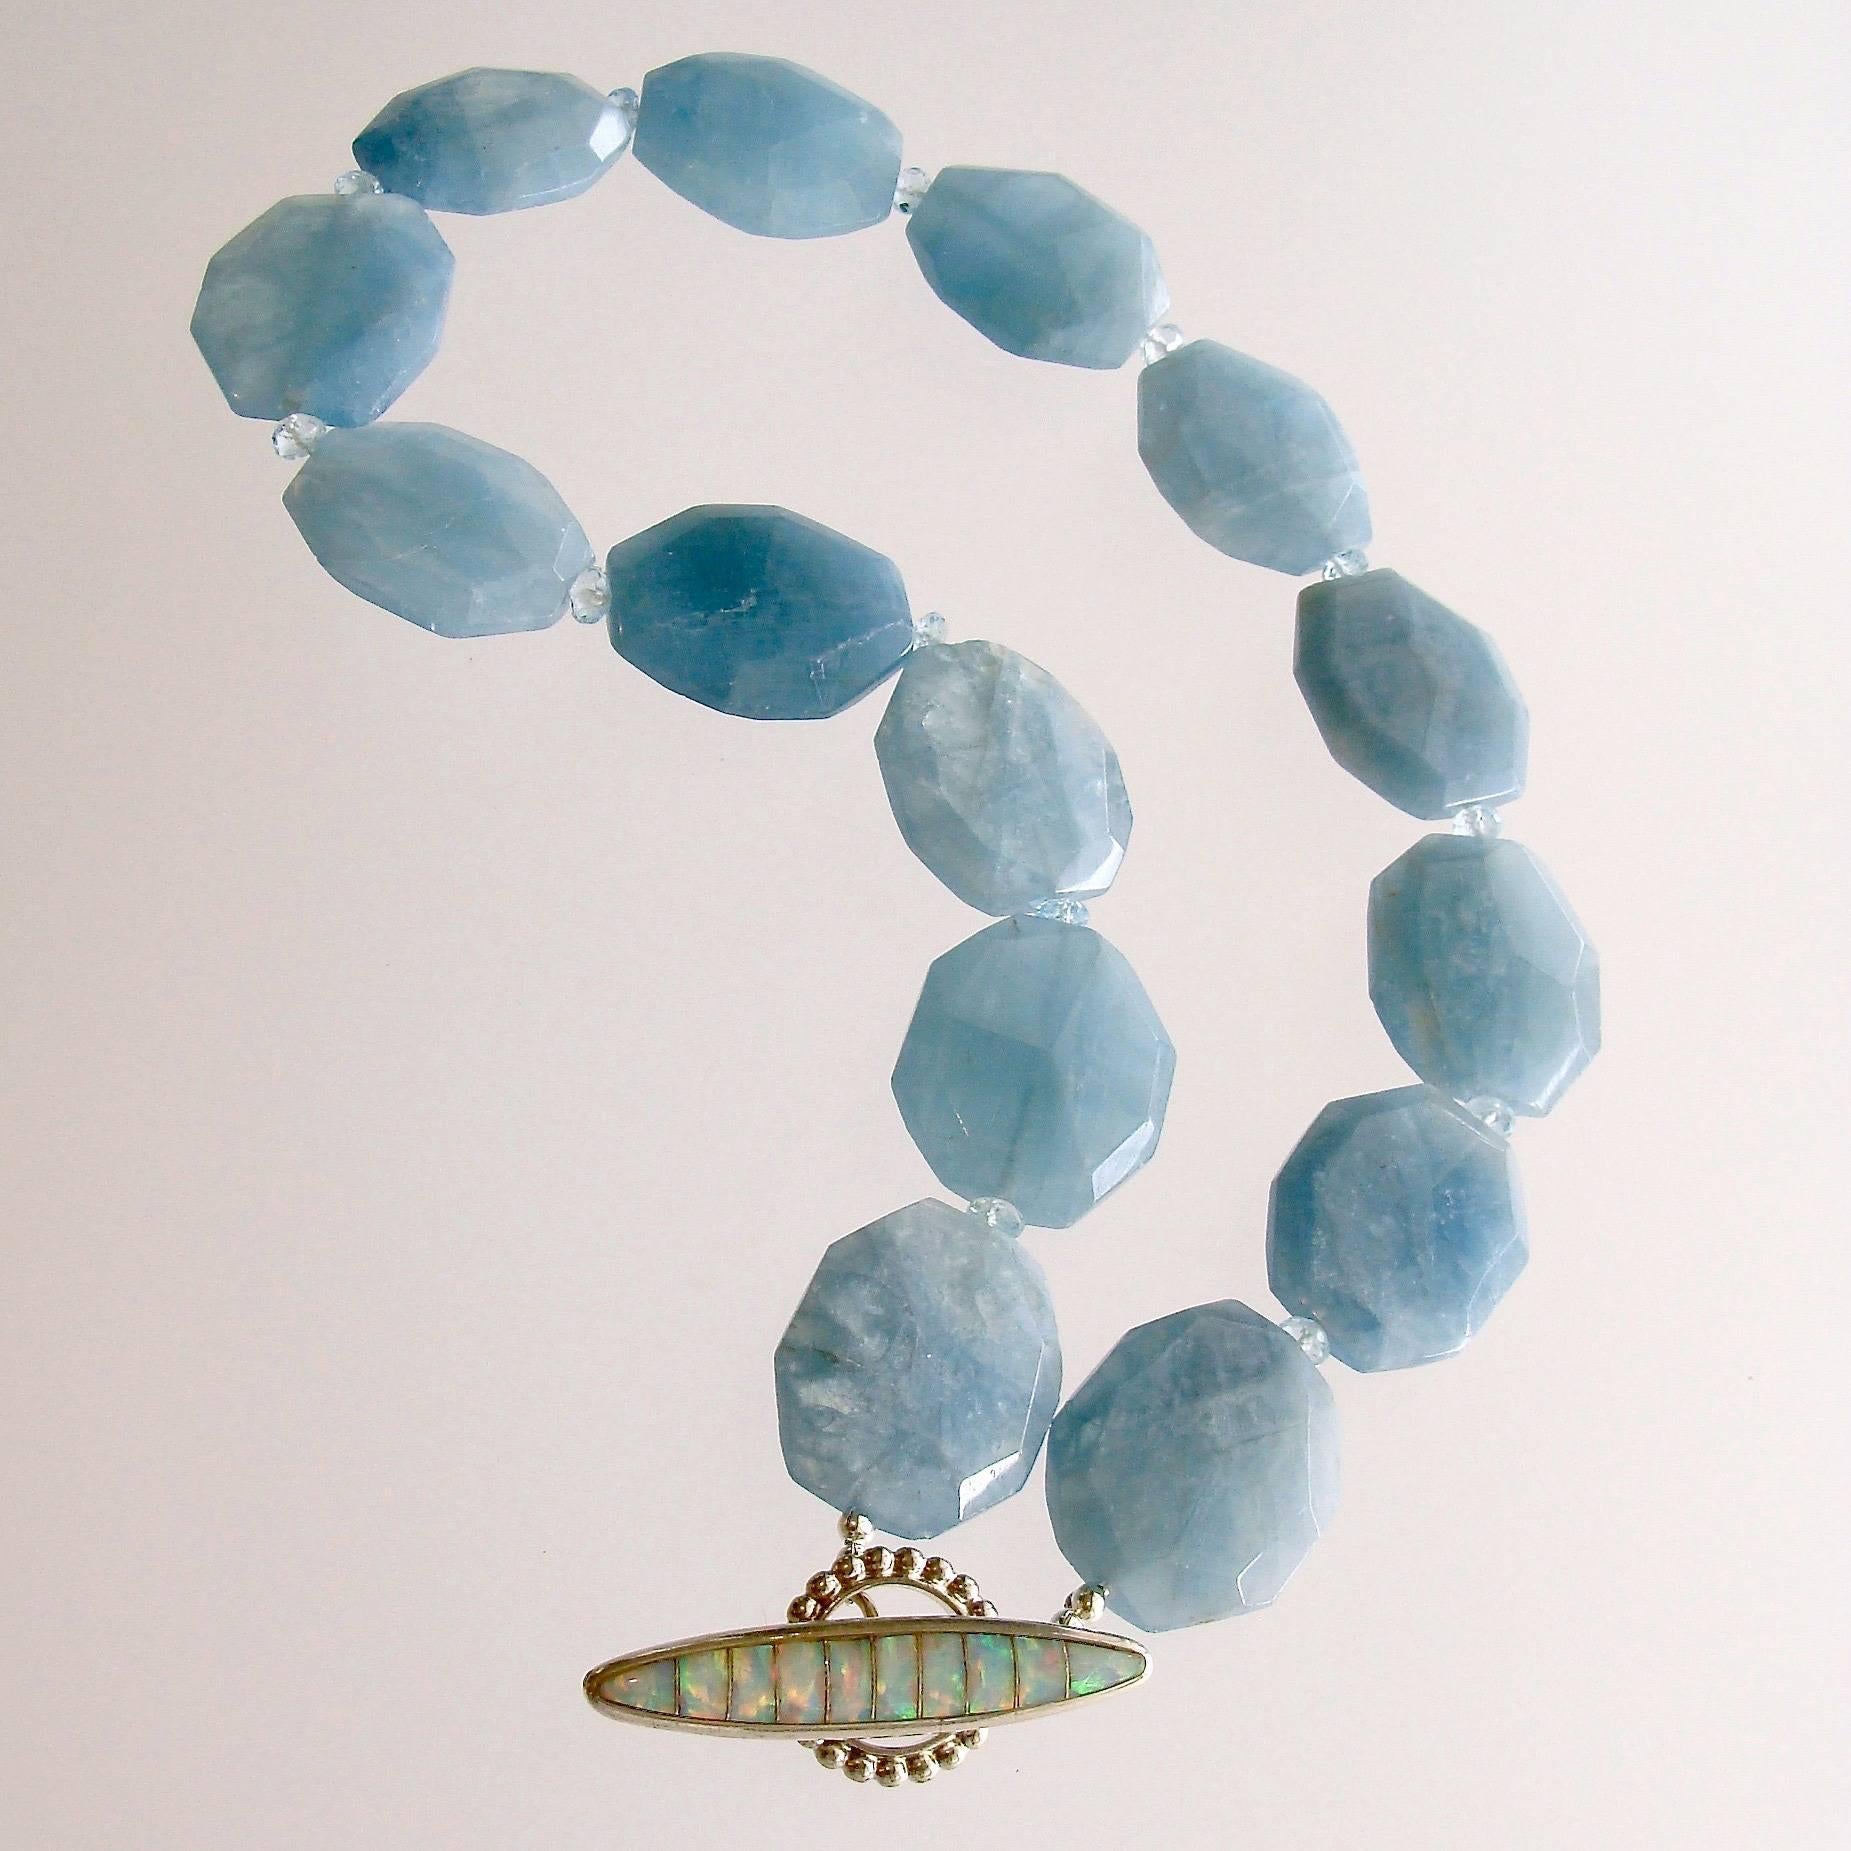 Bree Necklace.

Luxe and luxurious faceted aquamarine slab nuggets are separated with sparkling faceted blue topaz rondelles in this choker necklace design - repeating the rich blue color of the ocean against a white sandy beach.  A gorgeous inlay